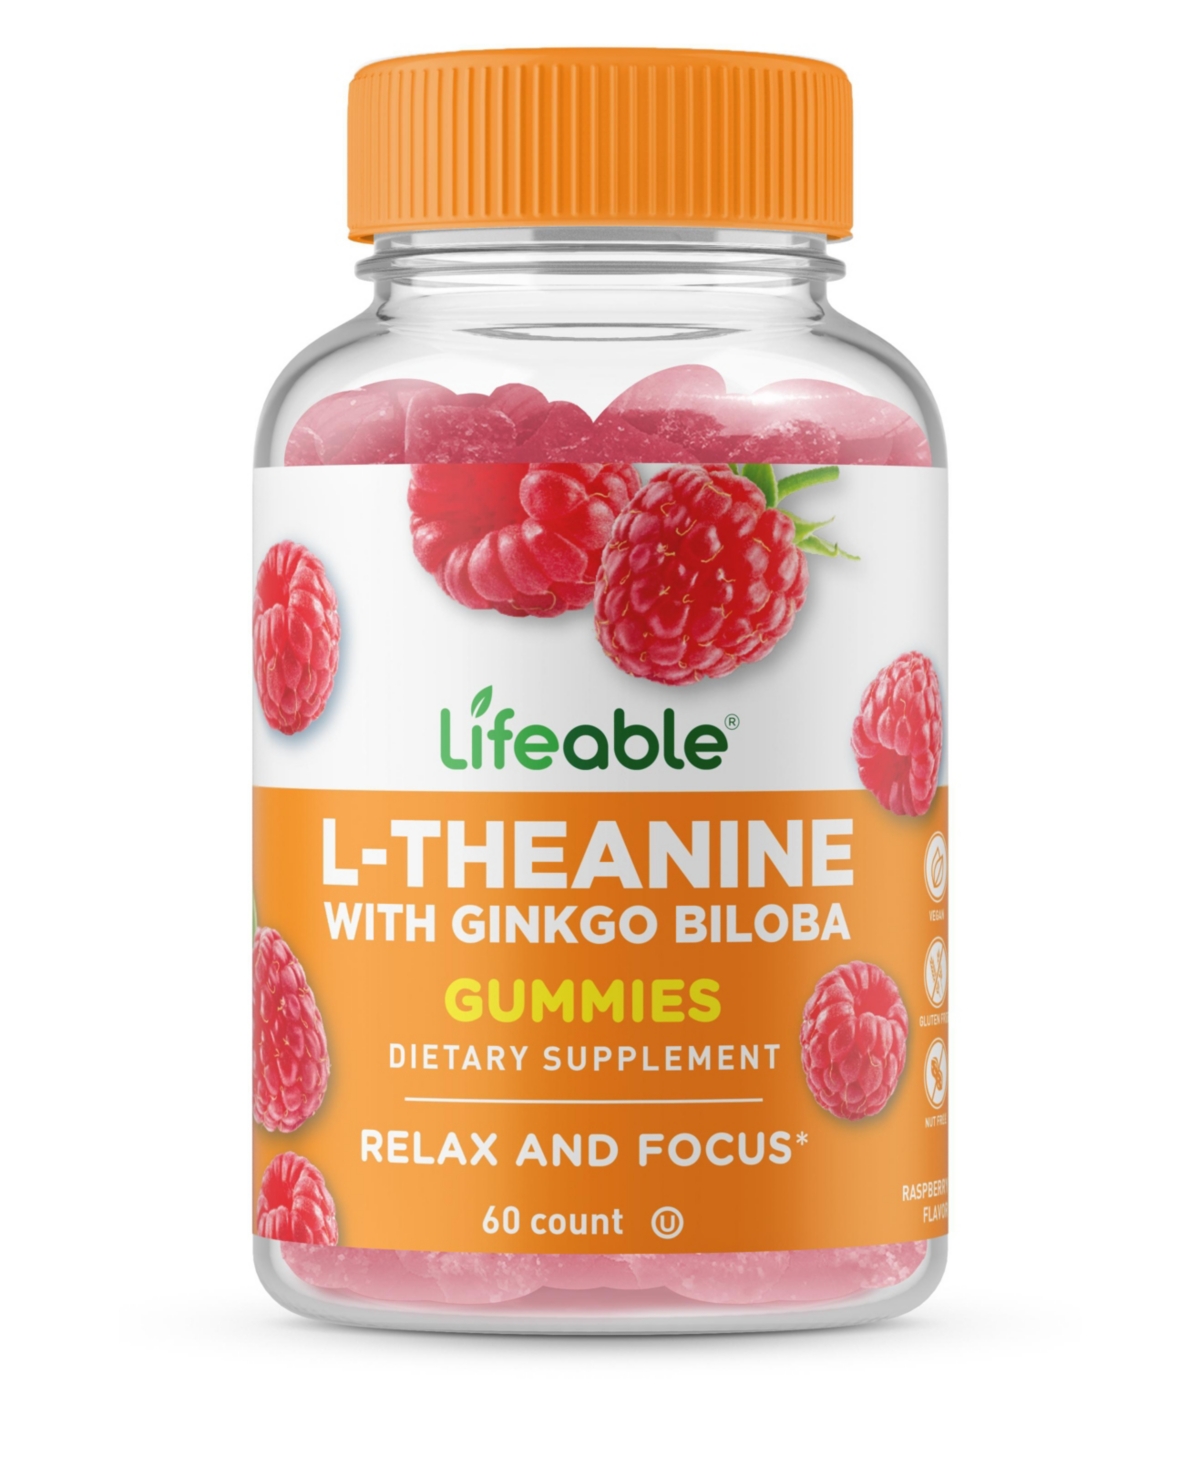 L Theanine with Ginkgo Biloba Gummies - Relax And Focus - Great Tasting Natural Flavor, Dietary Supplement Vitamins - 60 Gummies - Open Misce